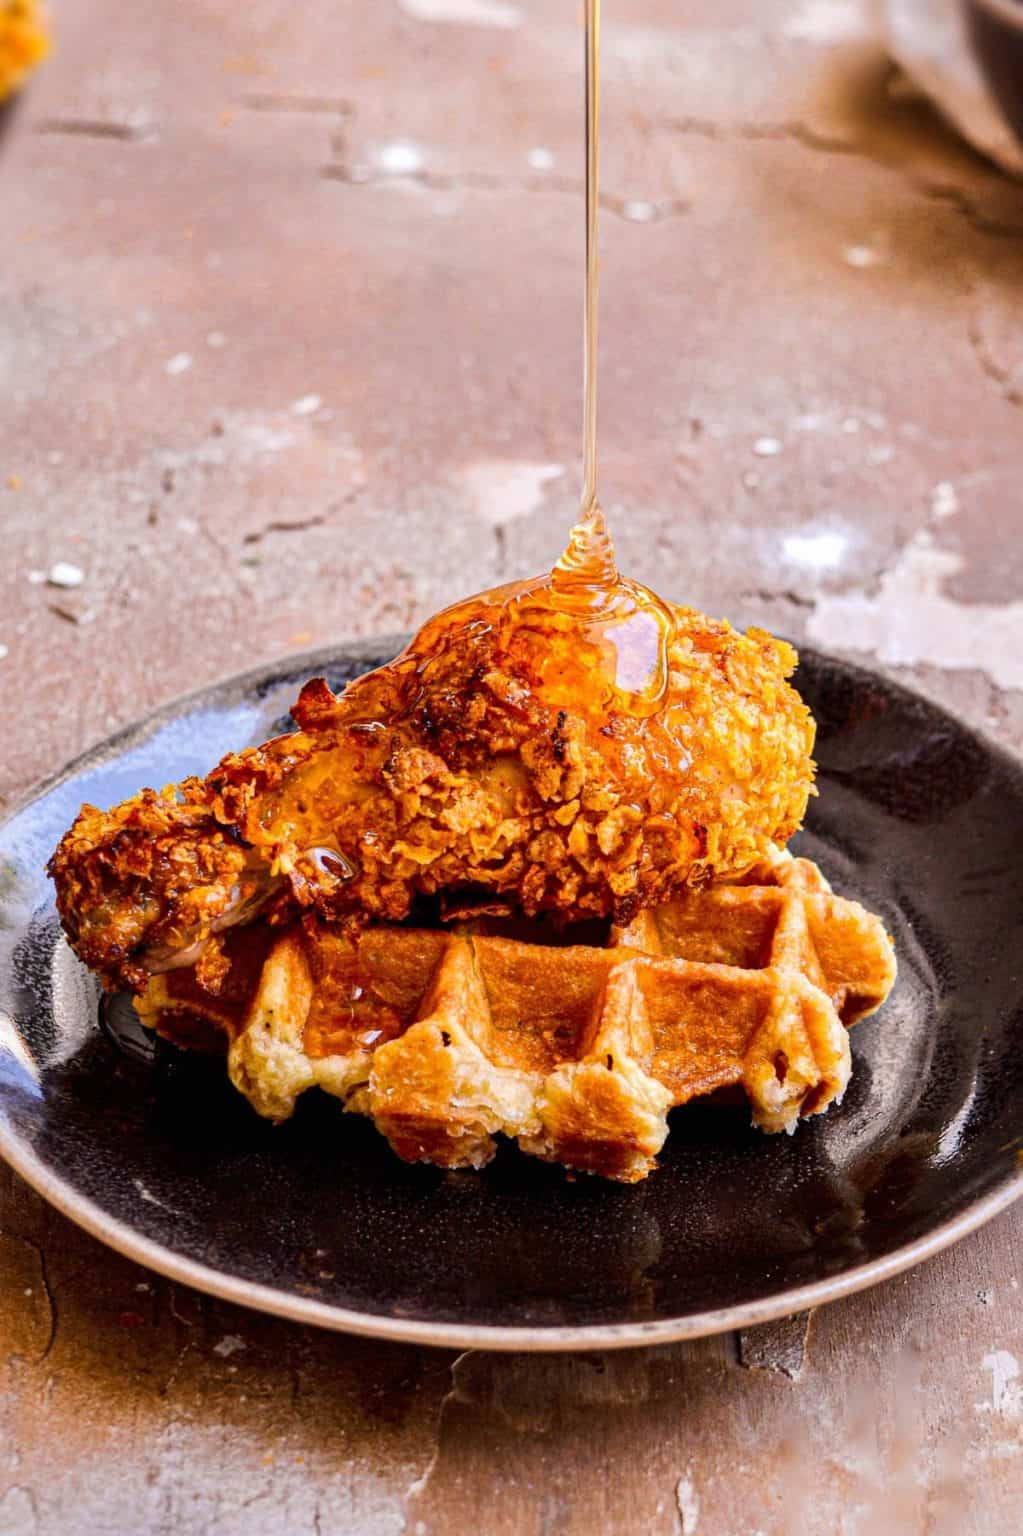 Best Chicken And Waffles Recipe Easy Chicken Recipes Video